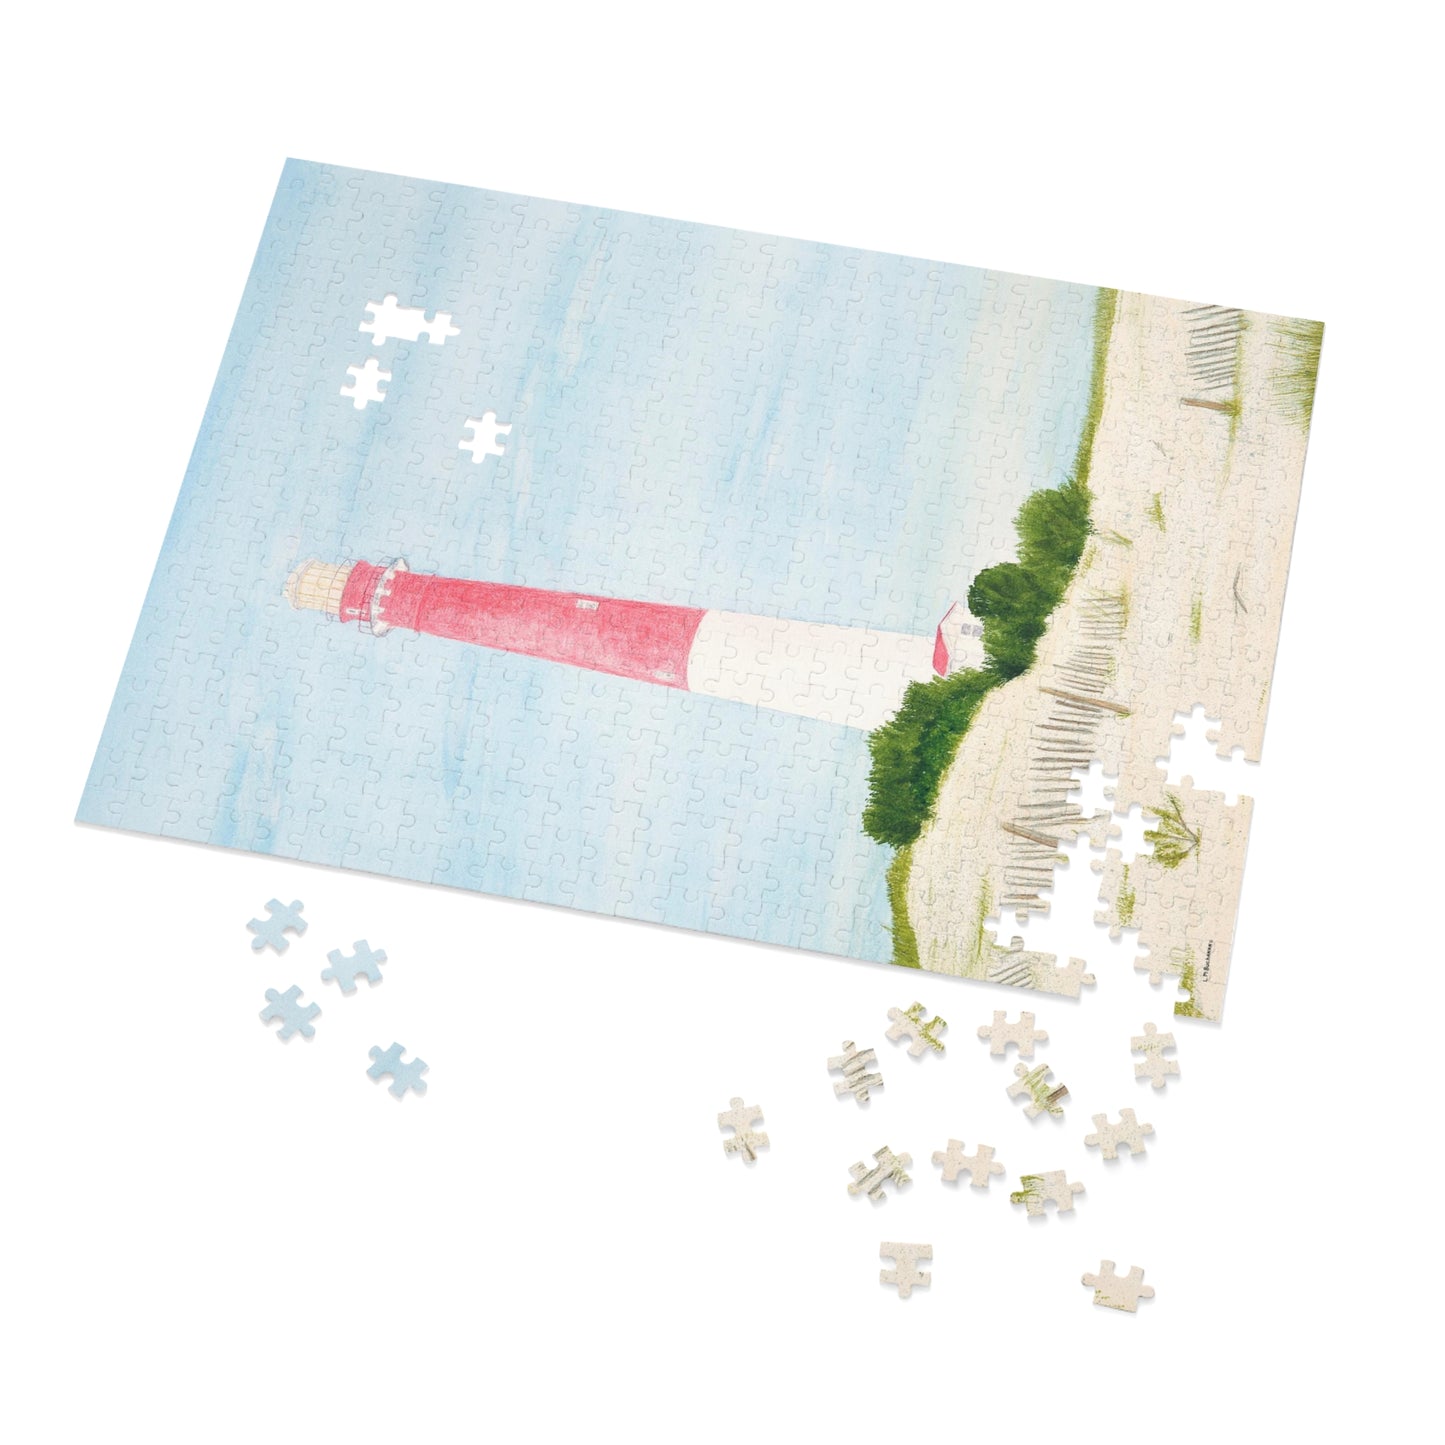 The Barnegat Lighthouse Jigsaw Puzzle provides hours of fun and comes in a handy metal storage box.